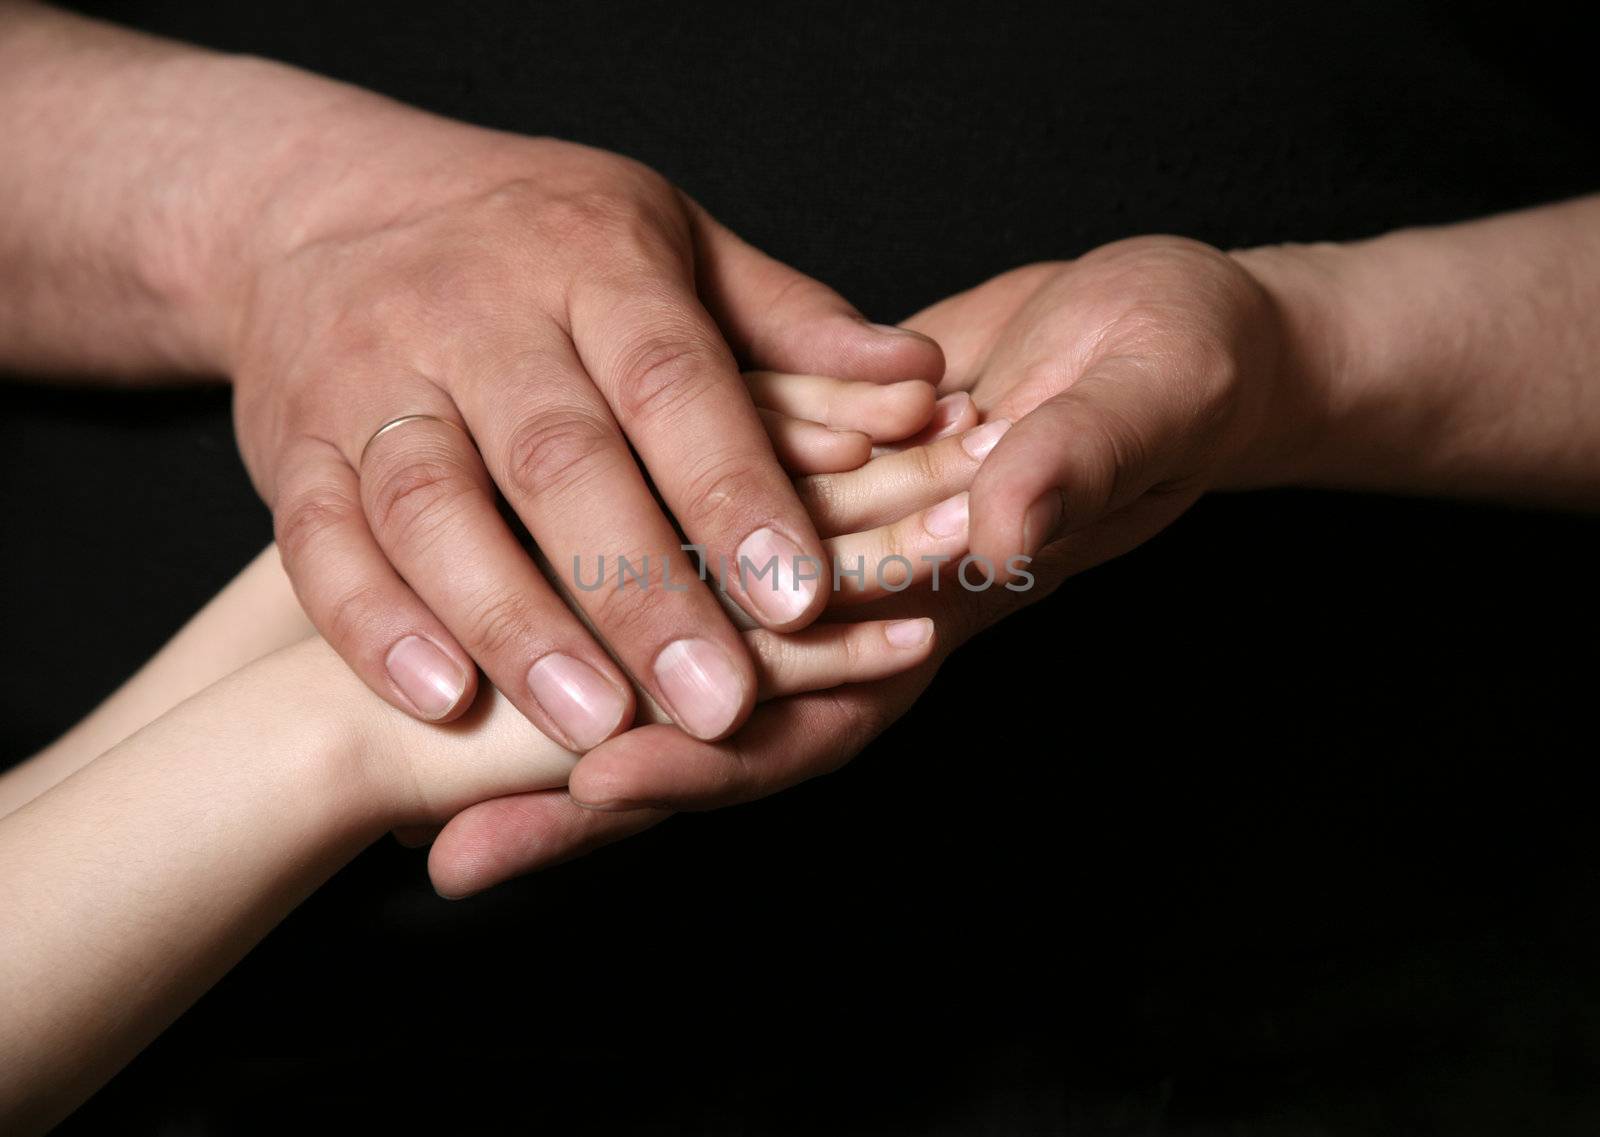 Hand of the adult person and hand of the small child on a dark background